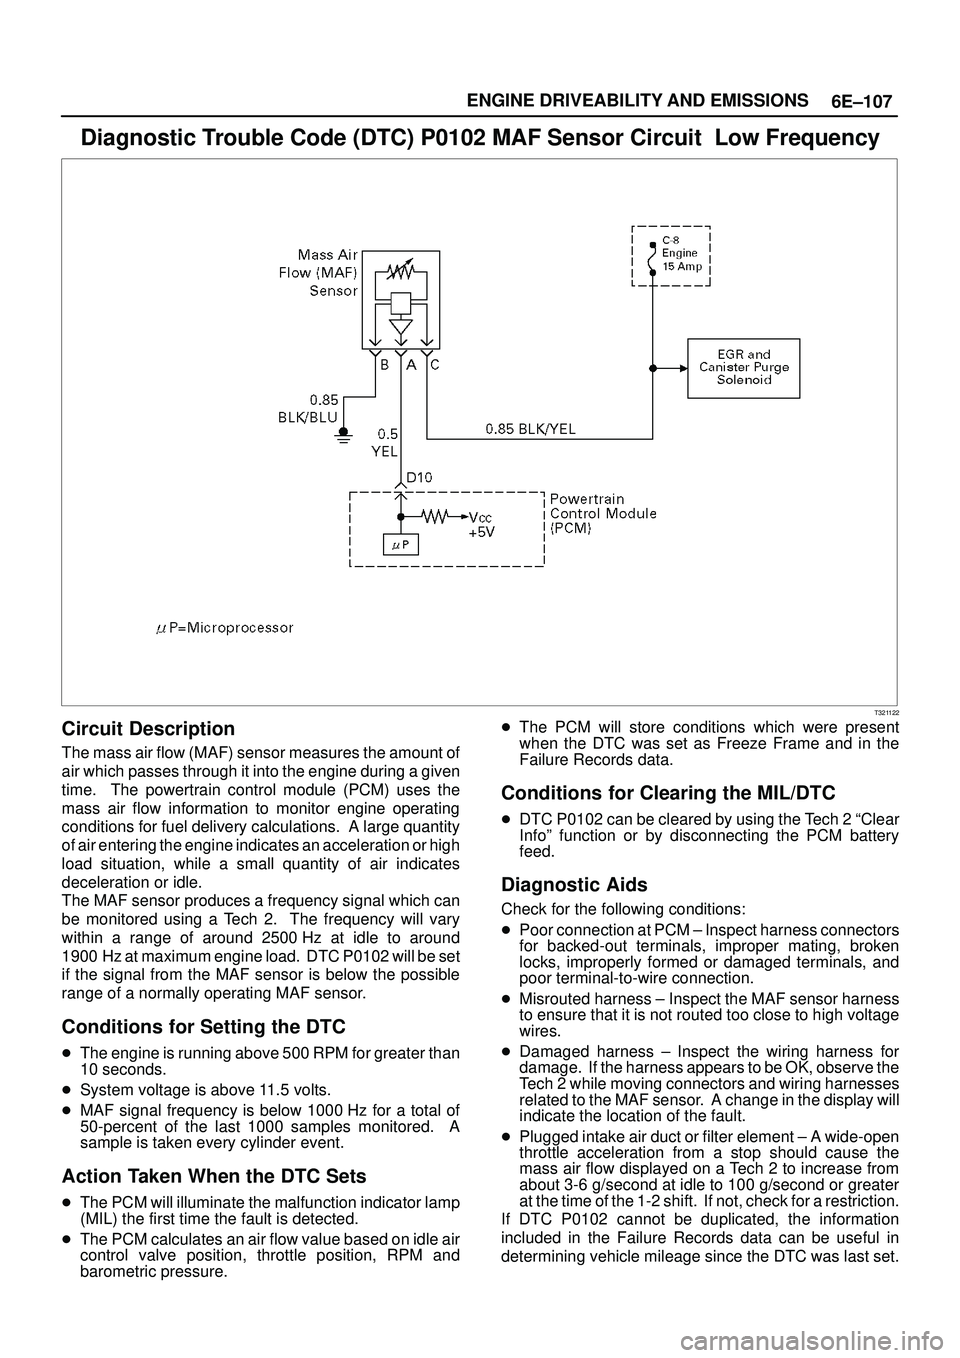 ISUZU TROOPER 1998  Service User Guide 6E±107 ENGINE DRIVEABILITY AND EMISSIONS
Diagnostic Trouble Code (DTC) P0102 MAF Sensor Circuit  Low Frequency
T321122
Circuit Description
The mass air flow (MAF) sensor measures the amount of
air wh